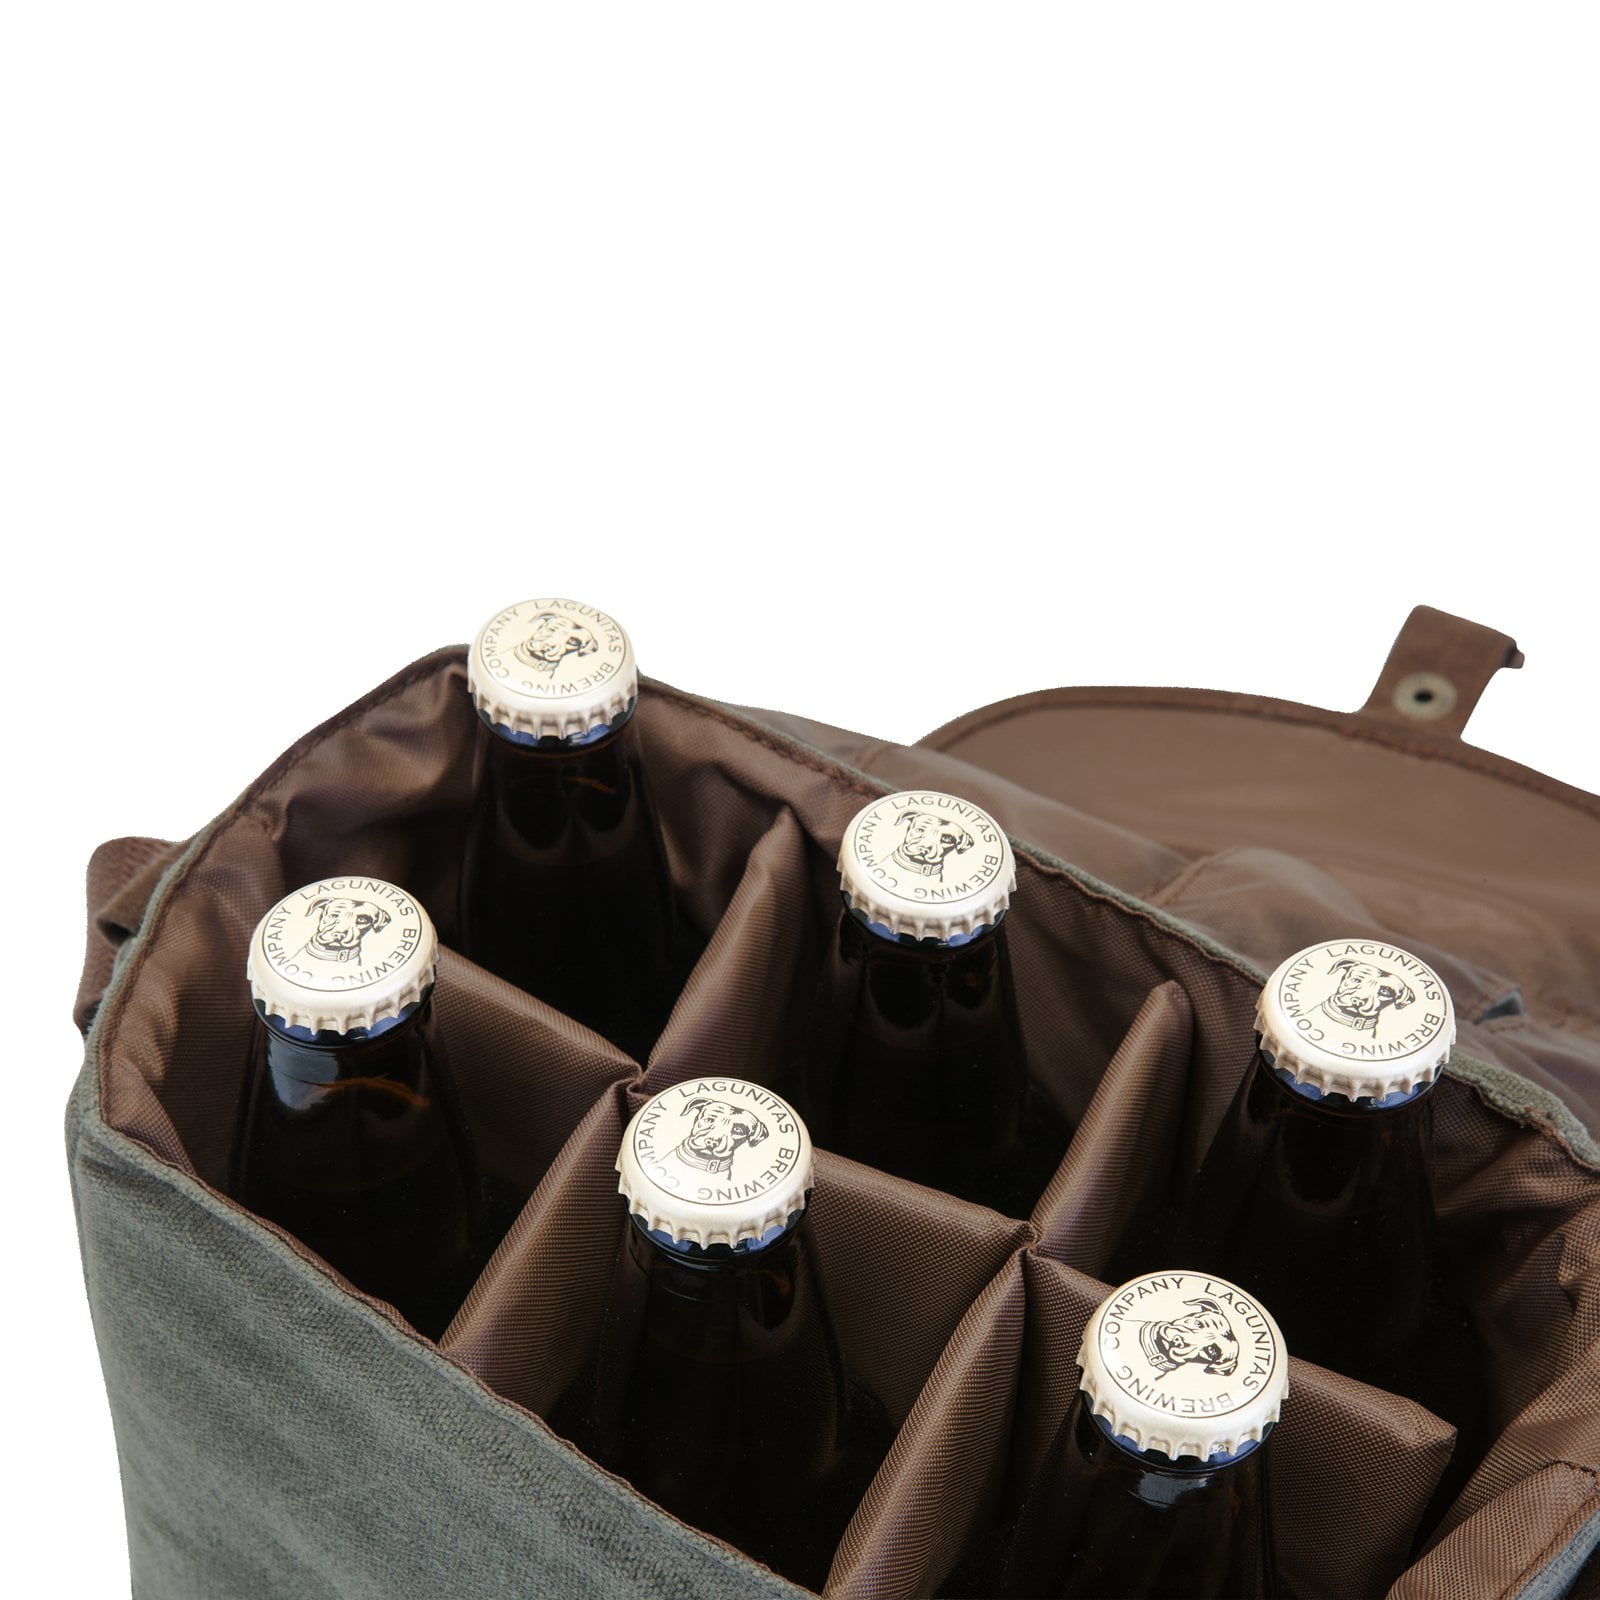 Picnic Time Beer Caddy Cooler Tote with Opener Black